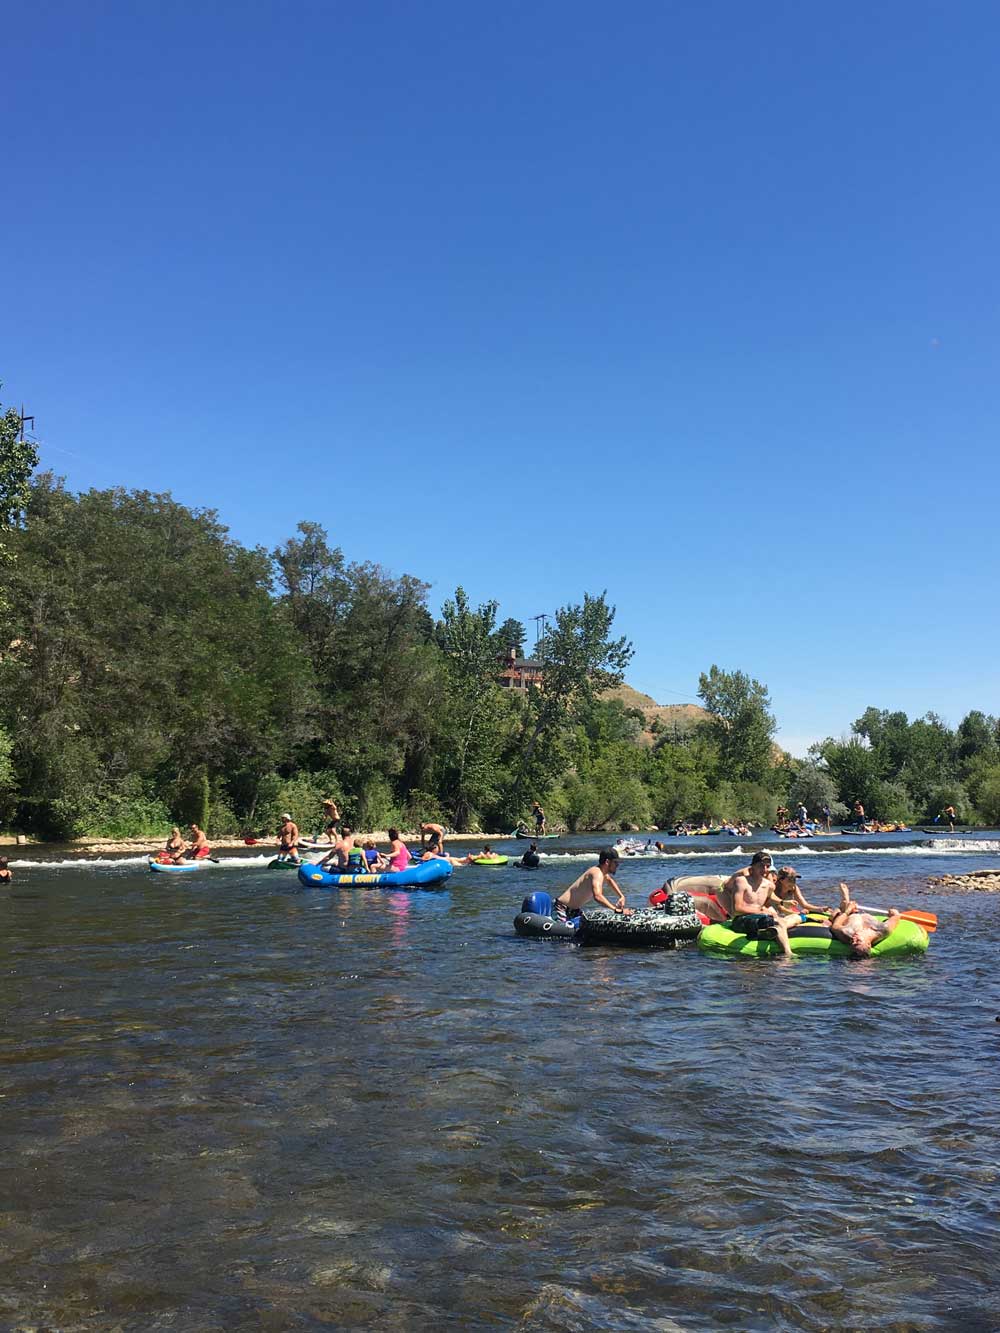 Discover the Boise River Float the River Totally Boise